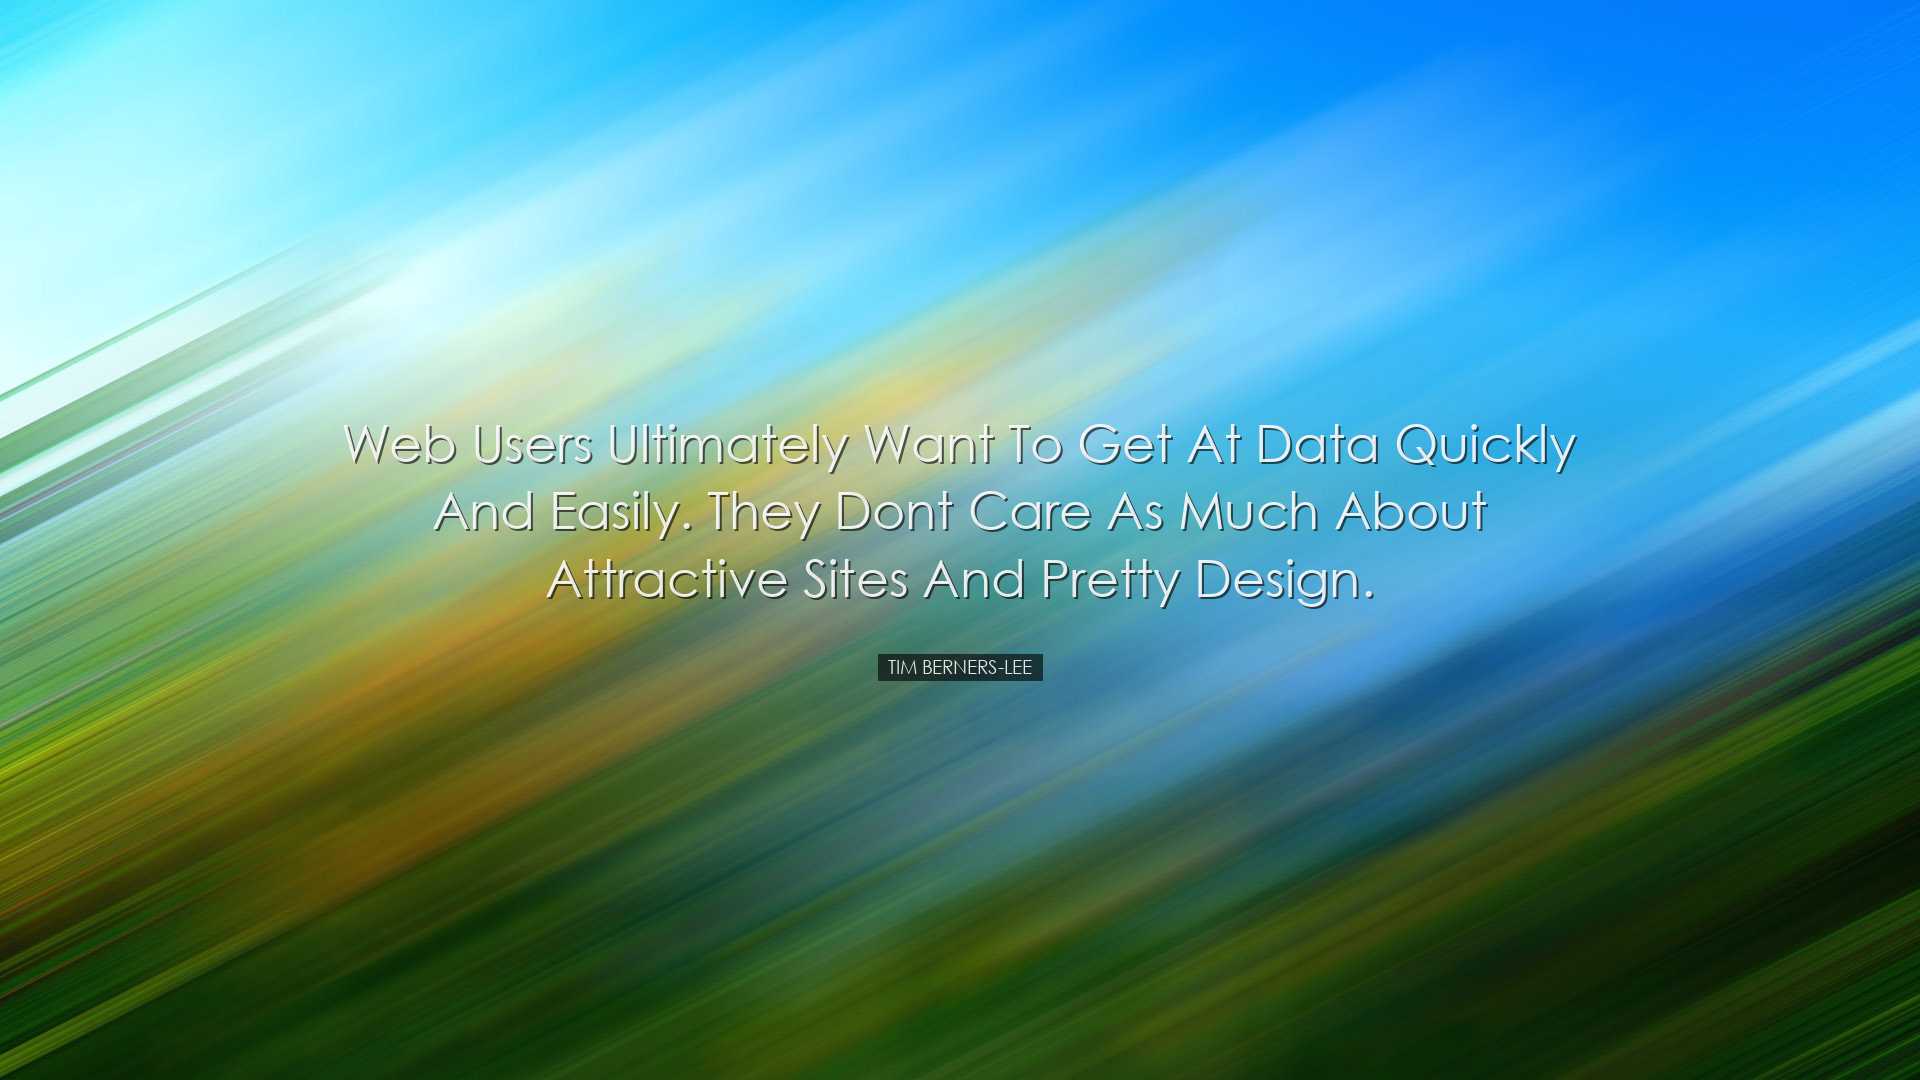 Web users ultimately want to get at data quickly and easily. They